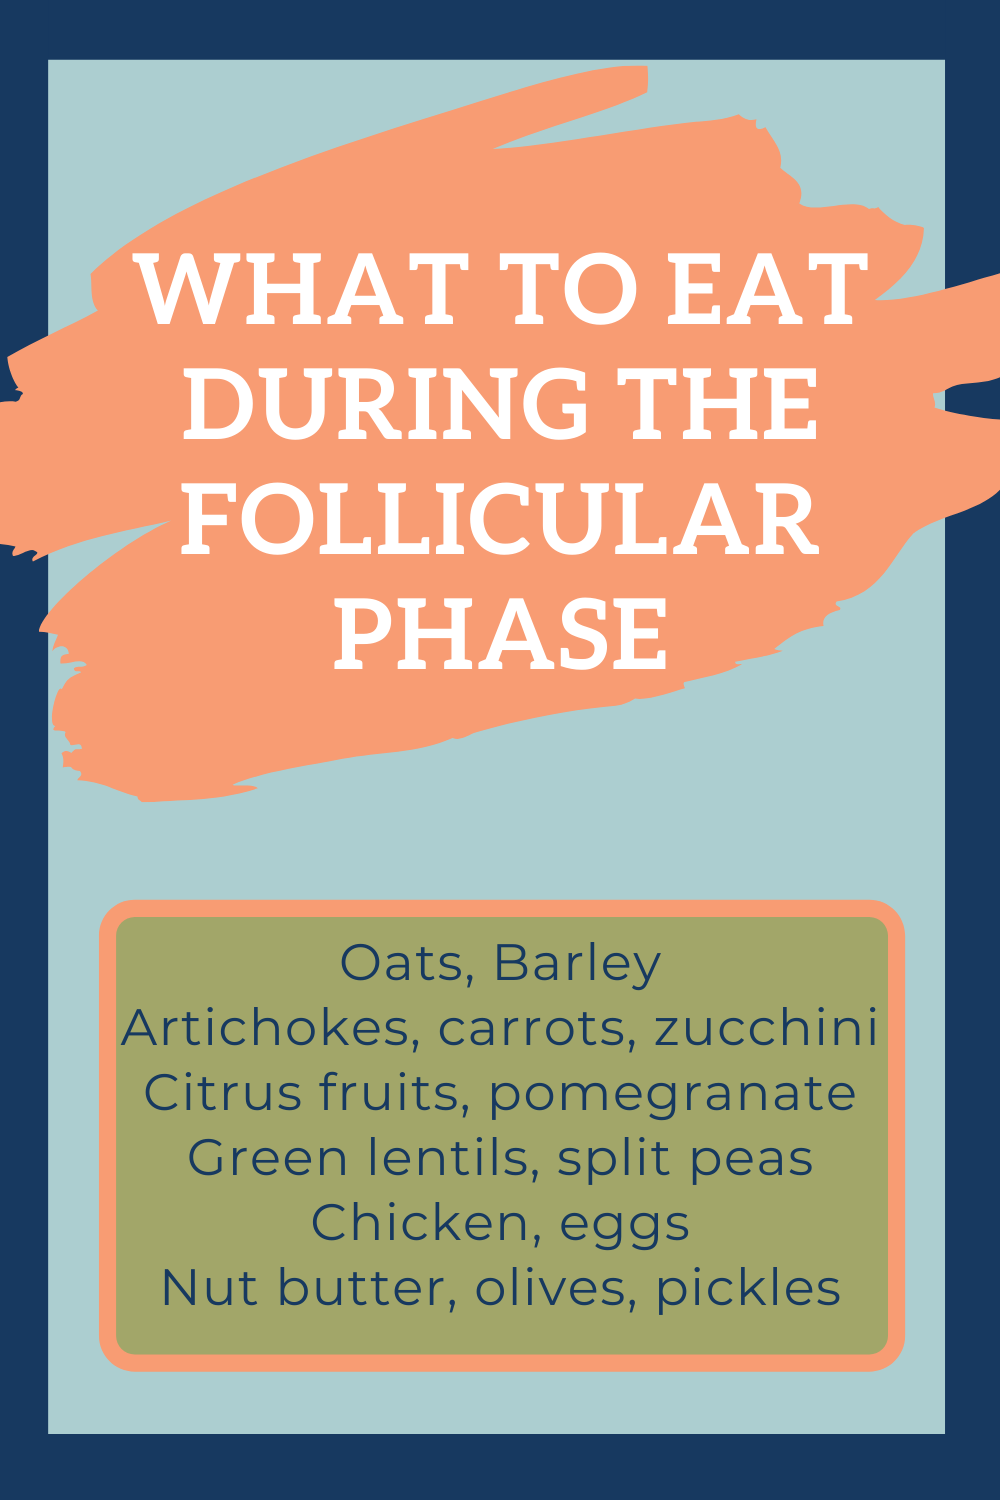 what to eat during the follicular phase